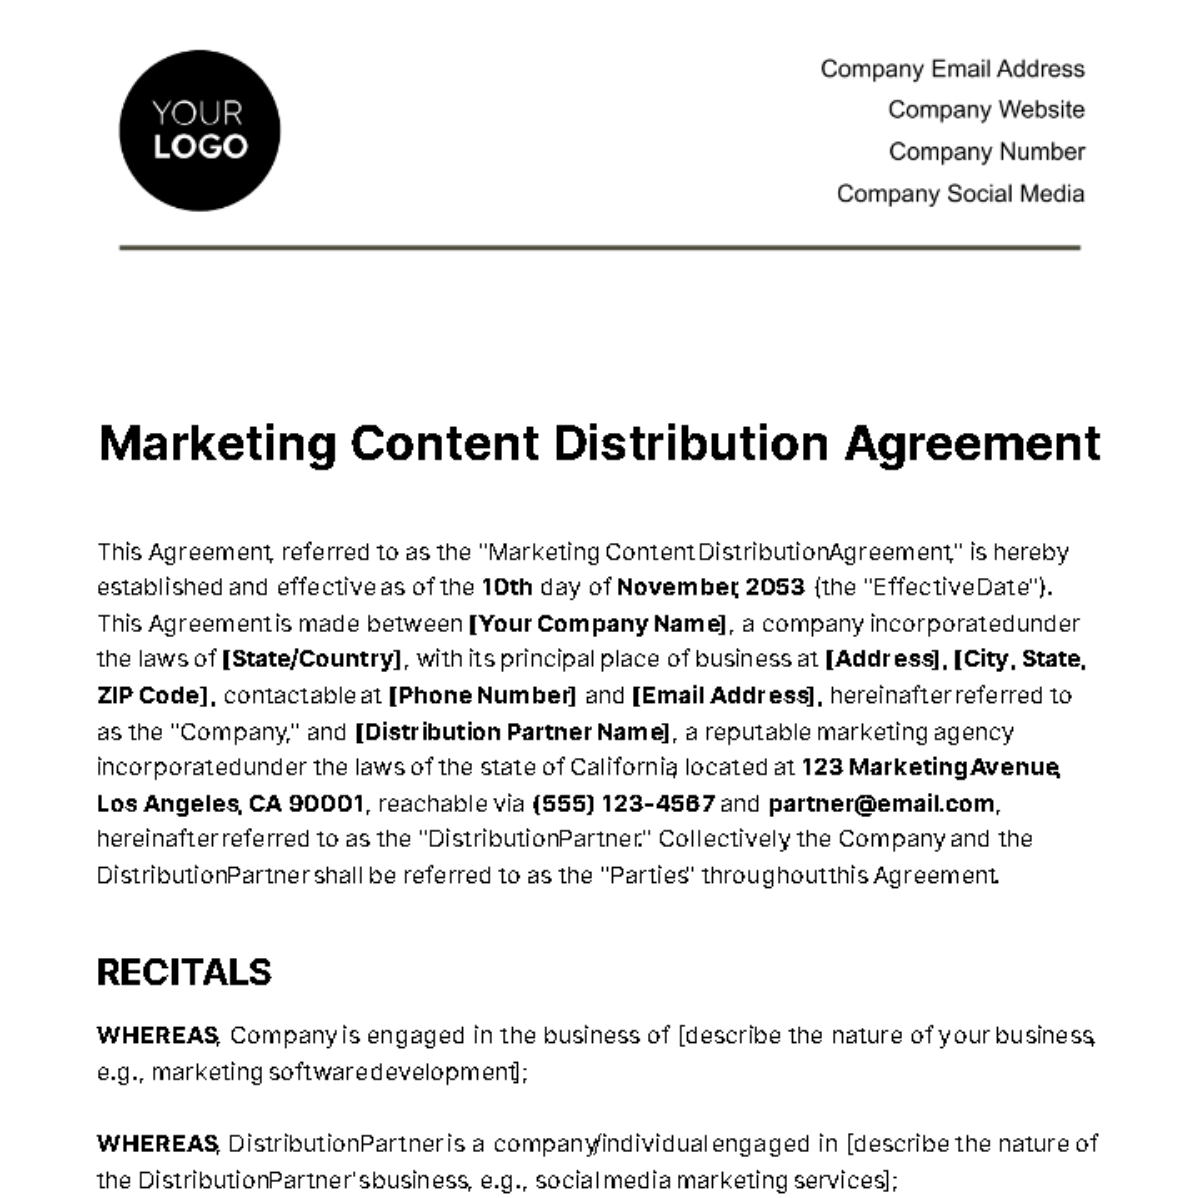 Marketing Content Distribution Agreement Template